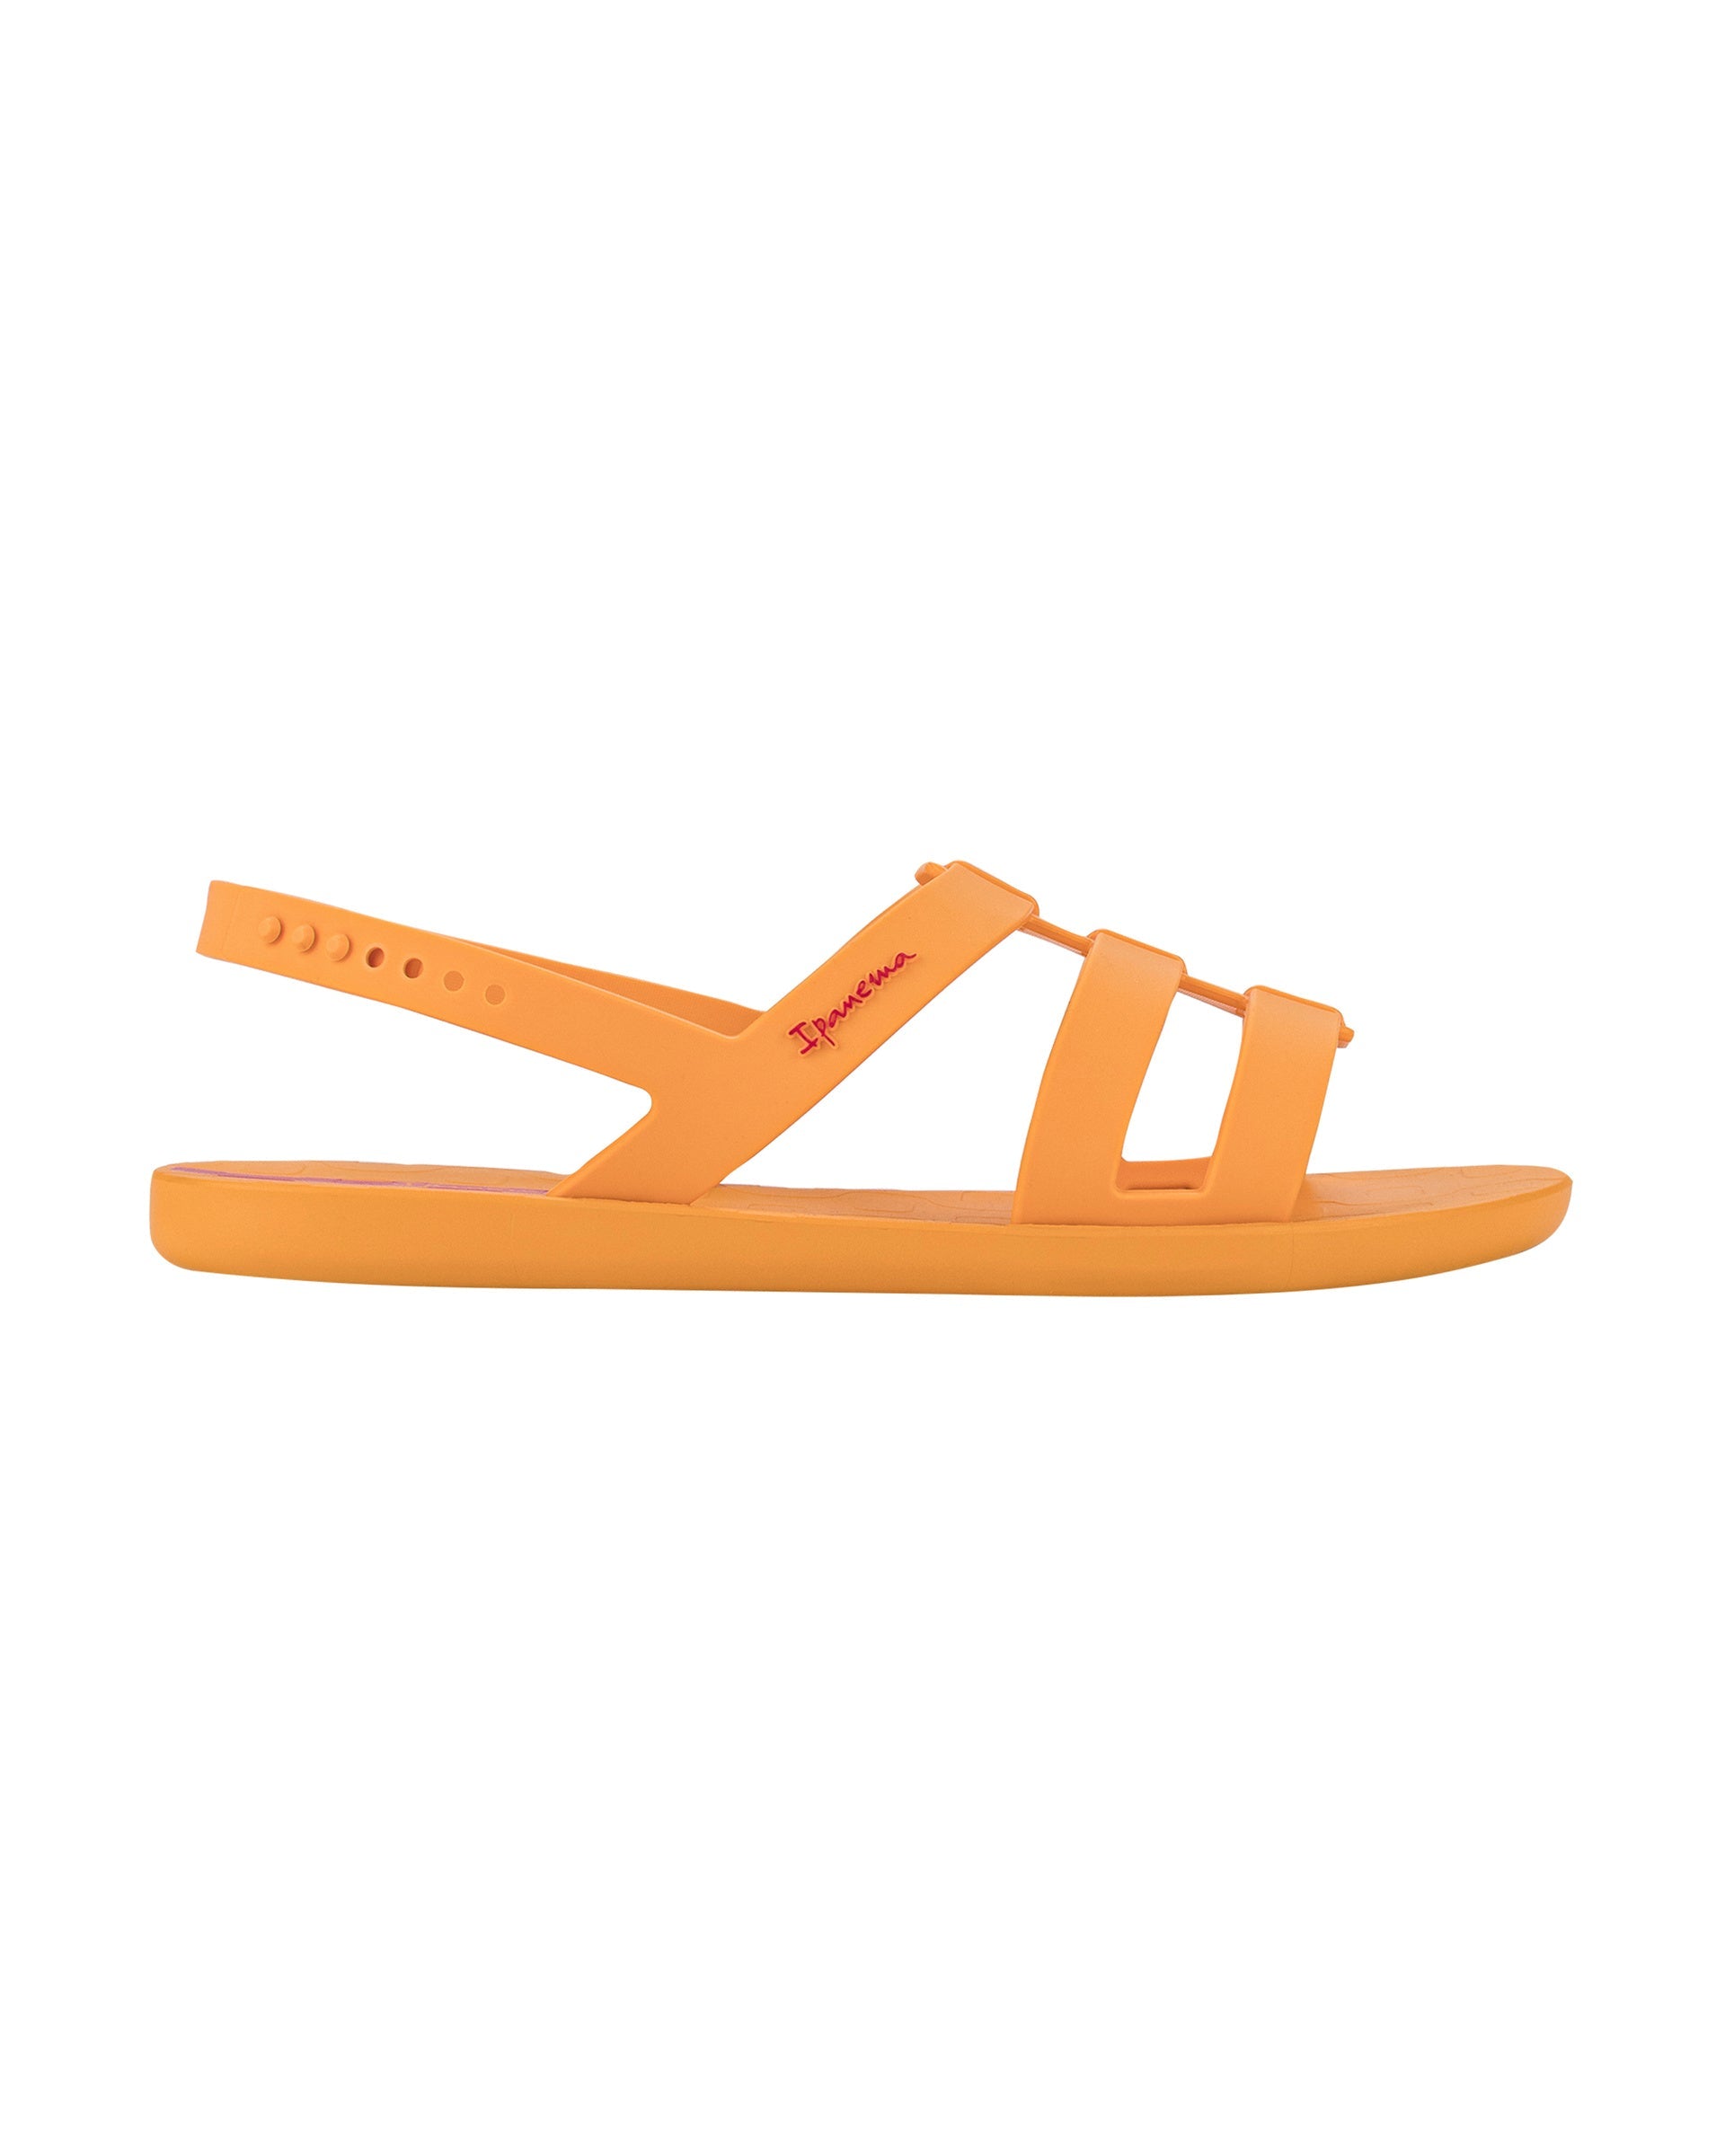 Outer side view of a orange Ipanema Style women's sandal.